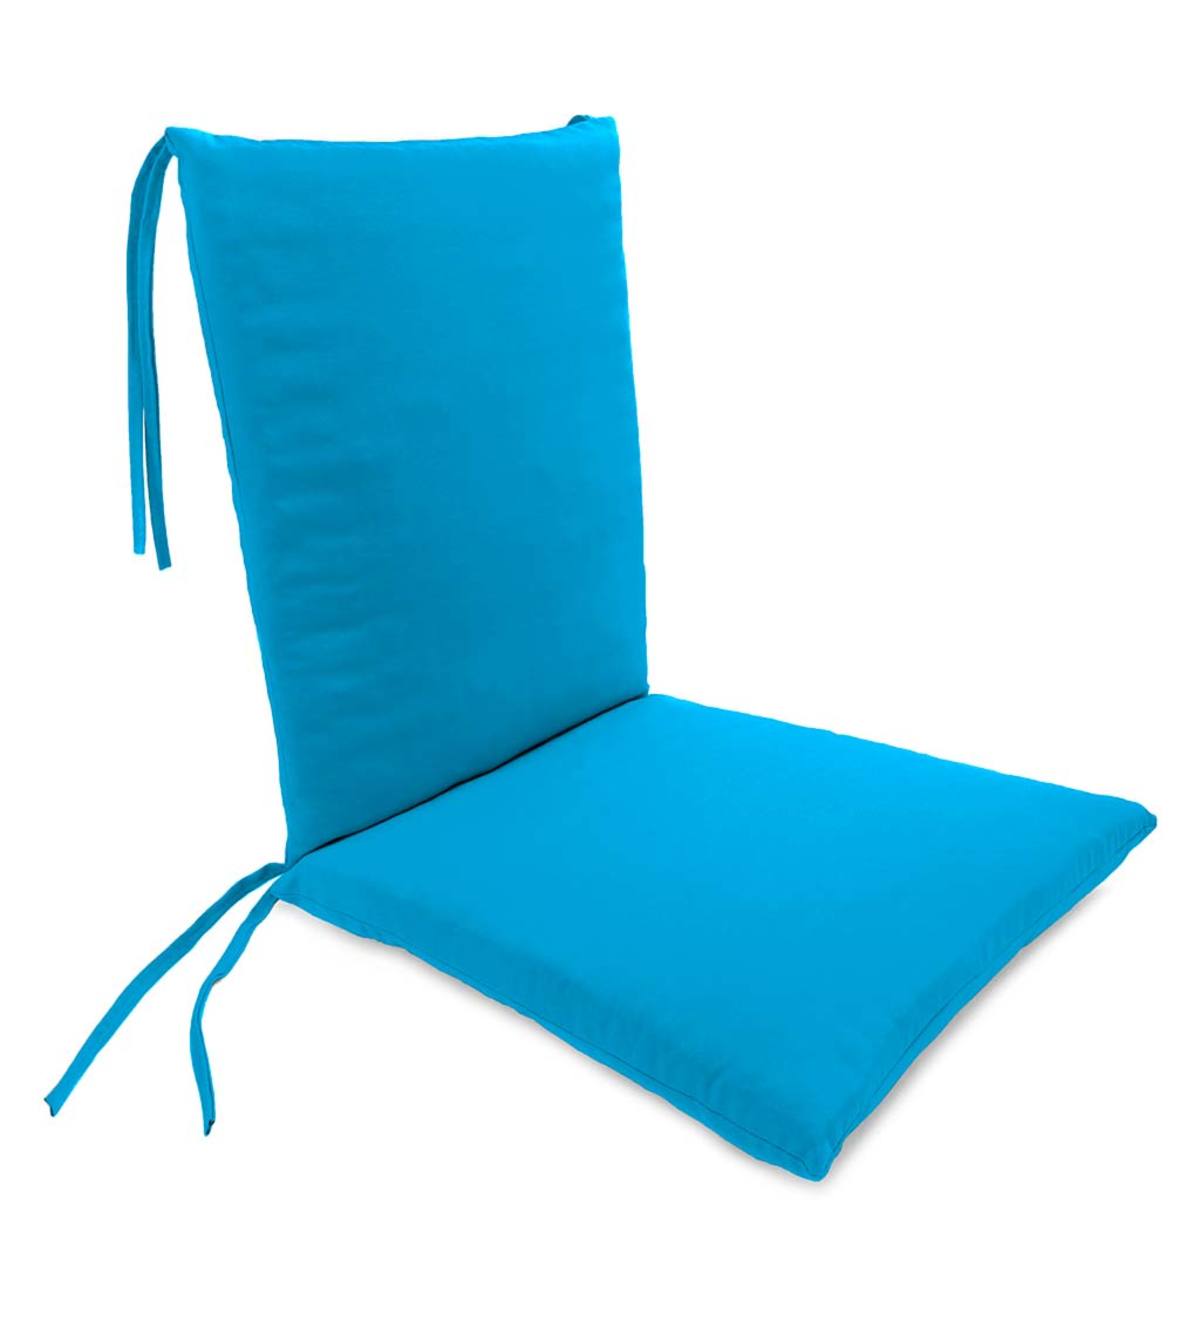 Rocking Chair Cushions, Outdoor Seat Cushions For Rocking Chairs